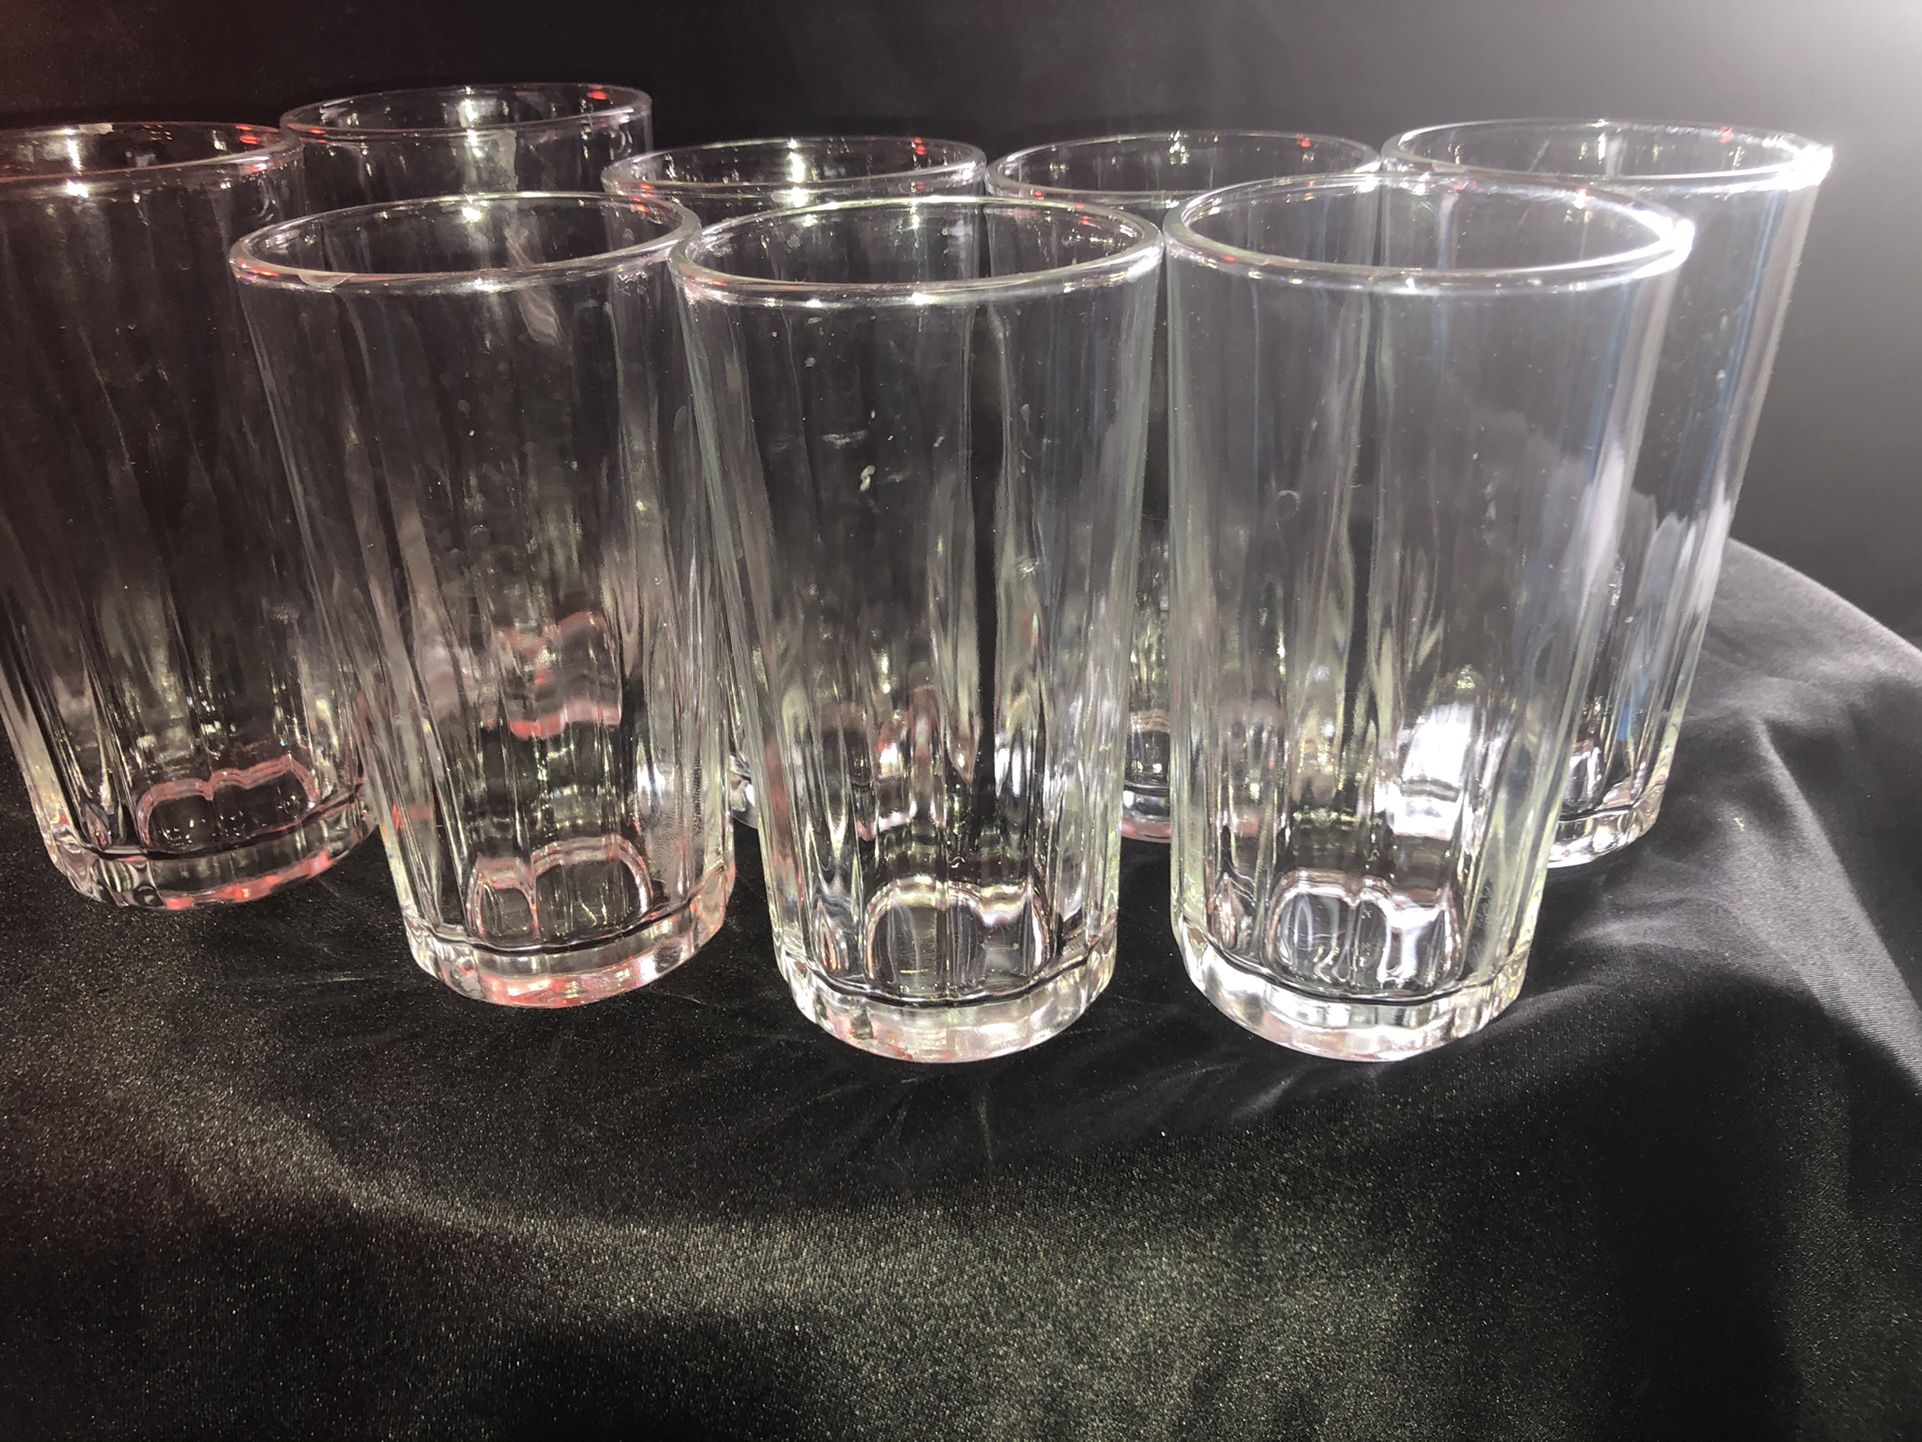 Beautiful Glassware 8 Tall, 4 Medium, 2 Short. 14 Glasses In This Set. All For $35